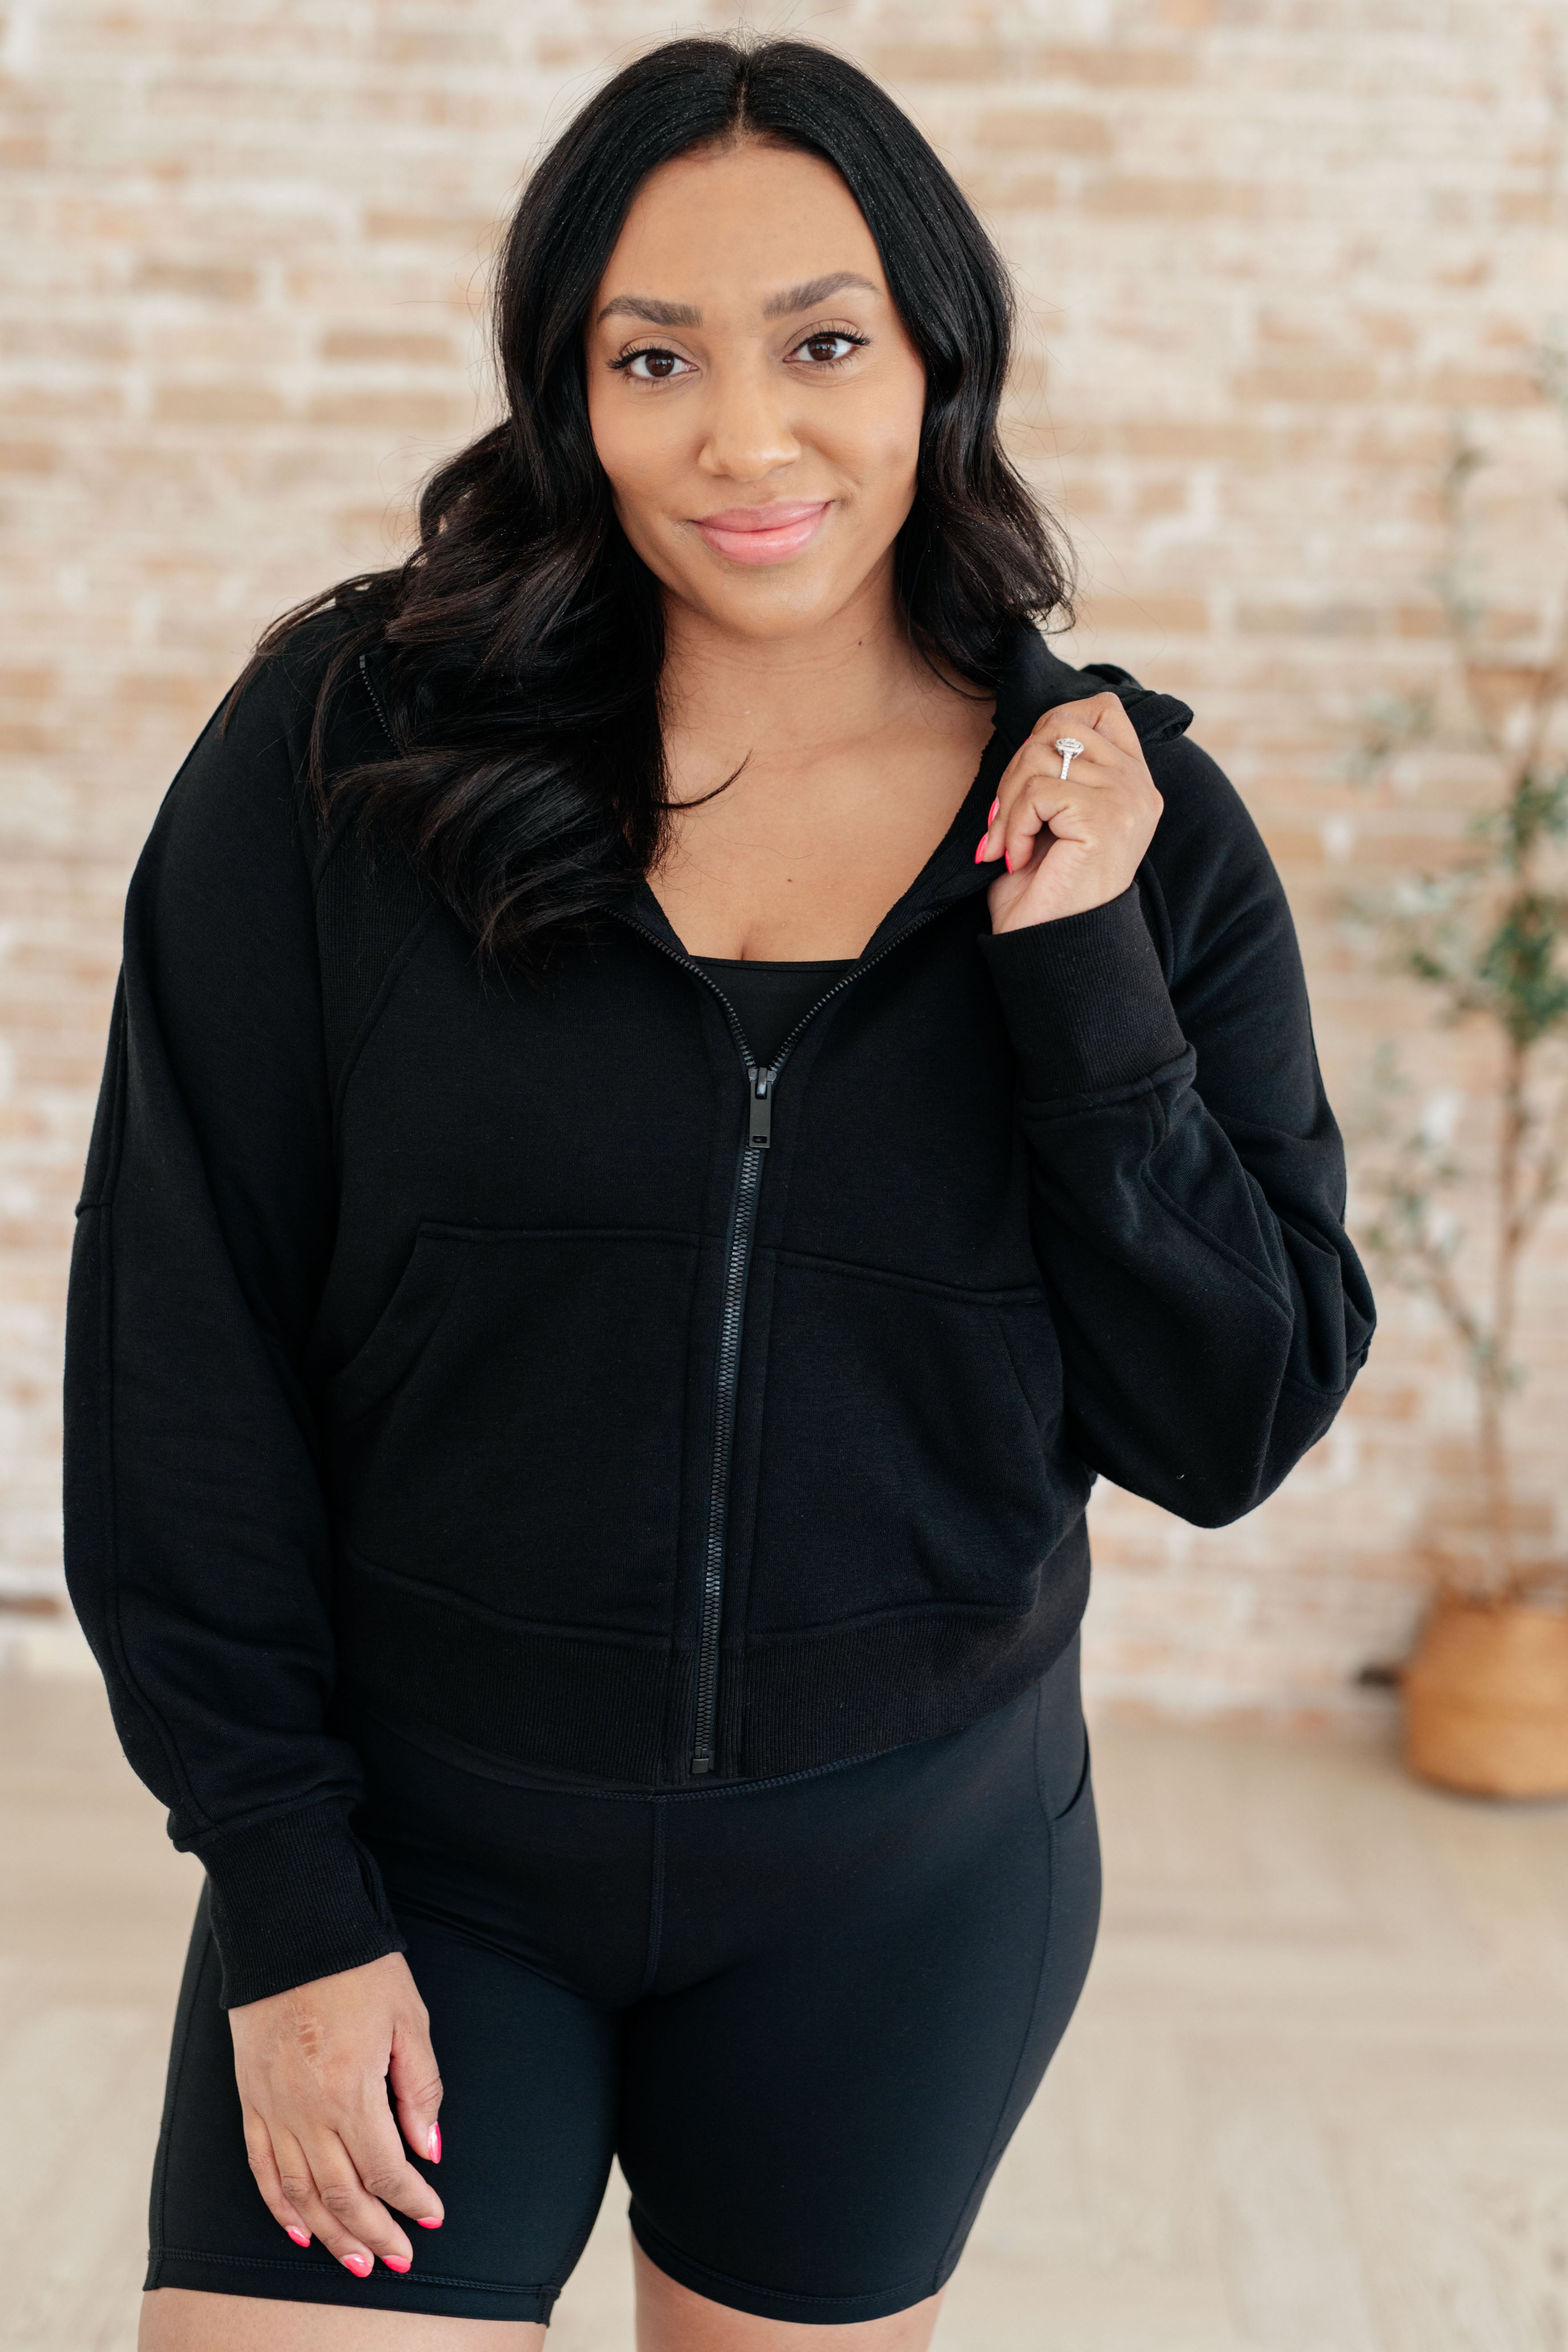 Rae Mode Sun or Shade Zip Up Jacket in Black Ave Shops